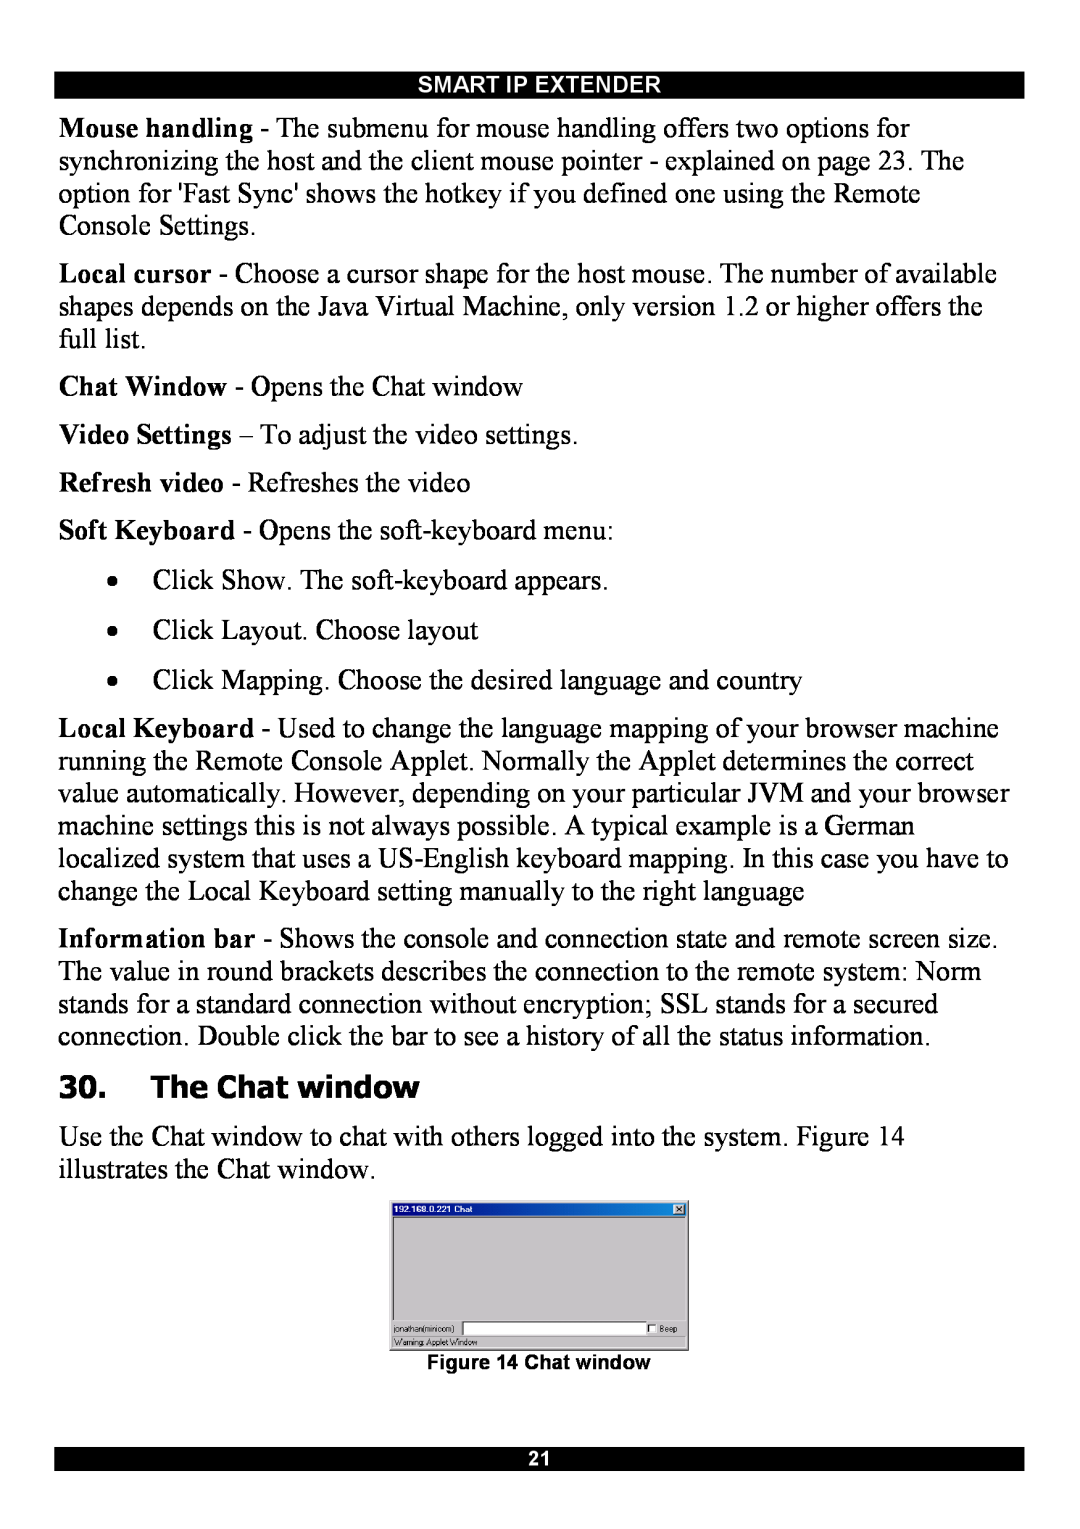 Minicom Advanced Systems Smart IP Extender manual The Chat window 